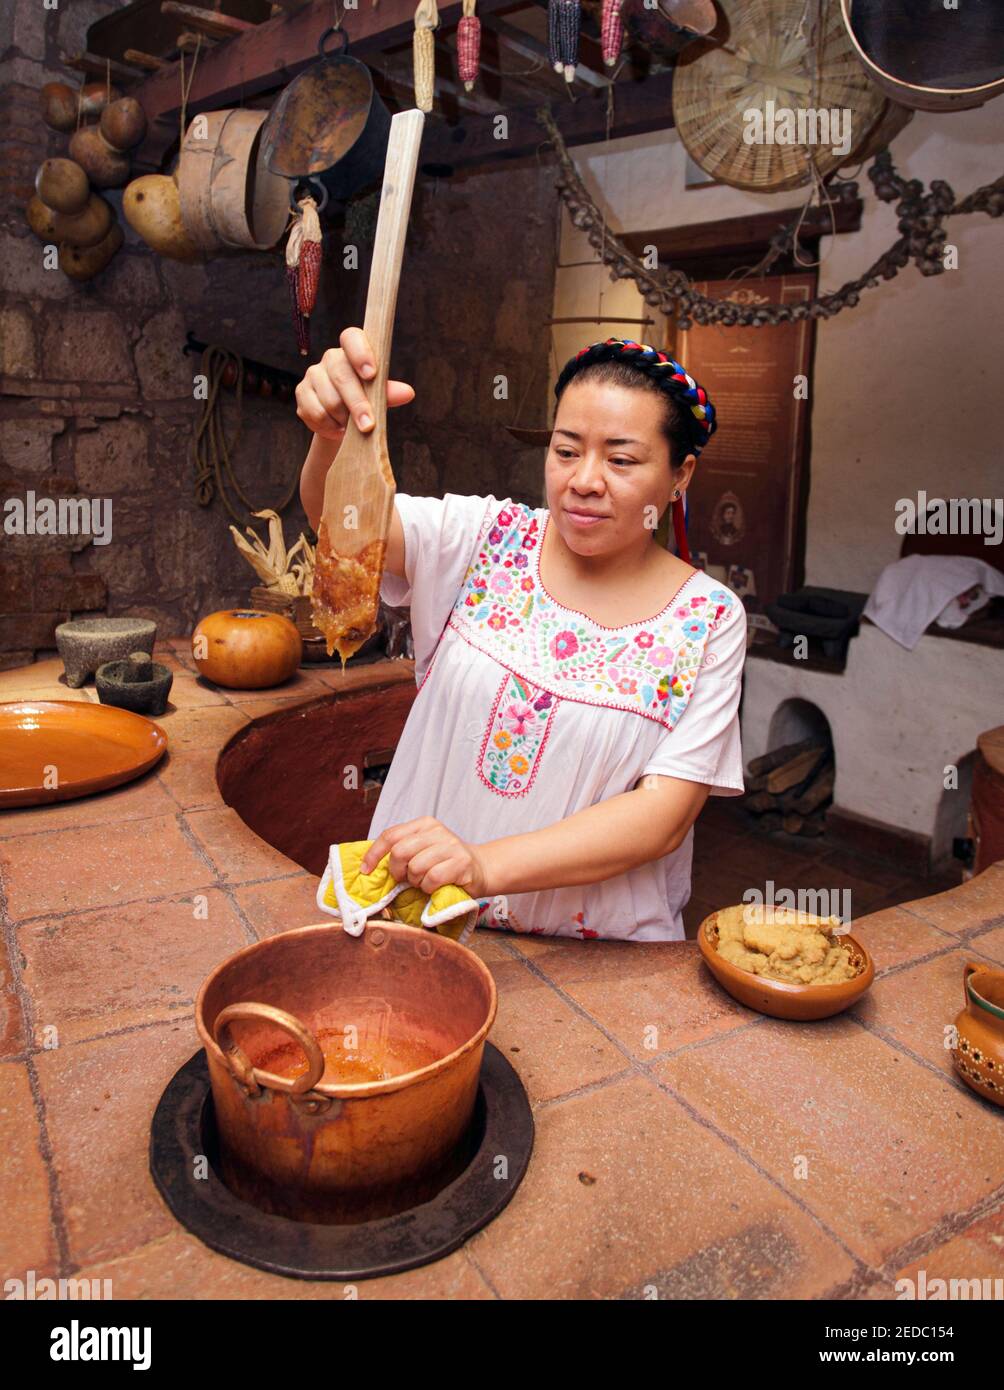 Demonstration of an artisan candy making process in the Candy Museum, or Museo de Dulces, in Morelia, Michoacan, Mexico. Stock Photo